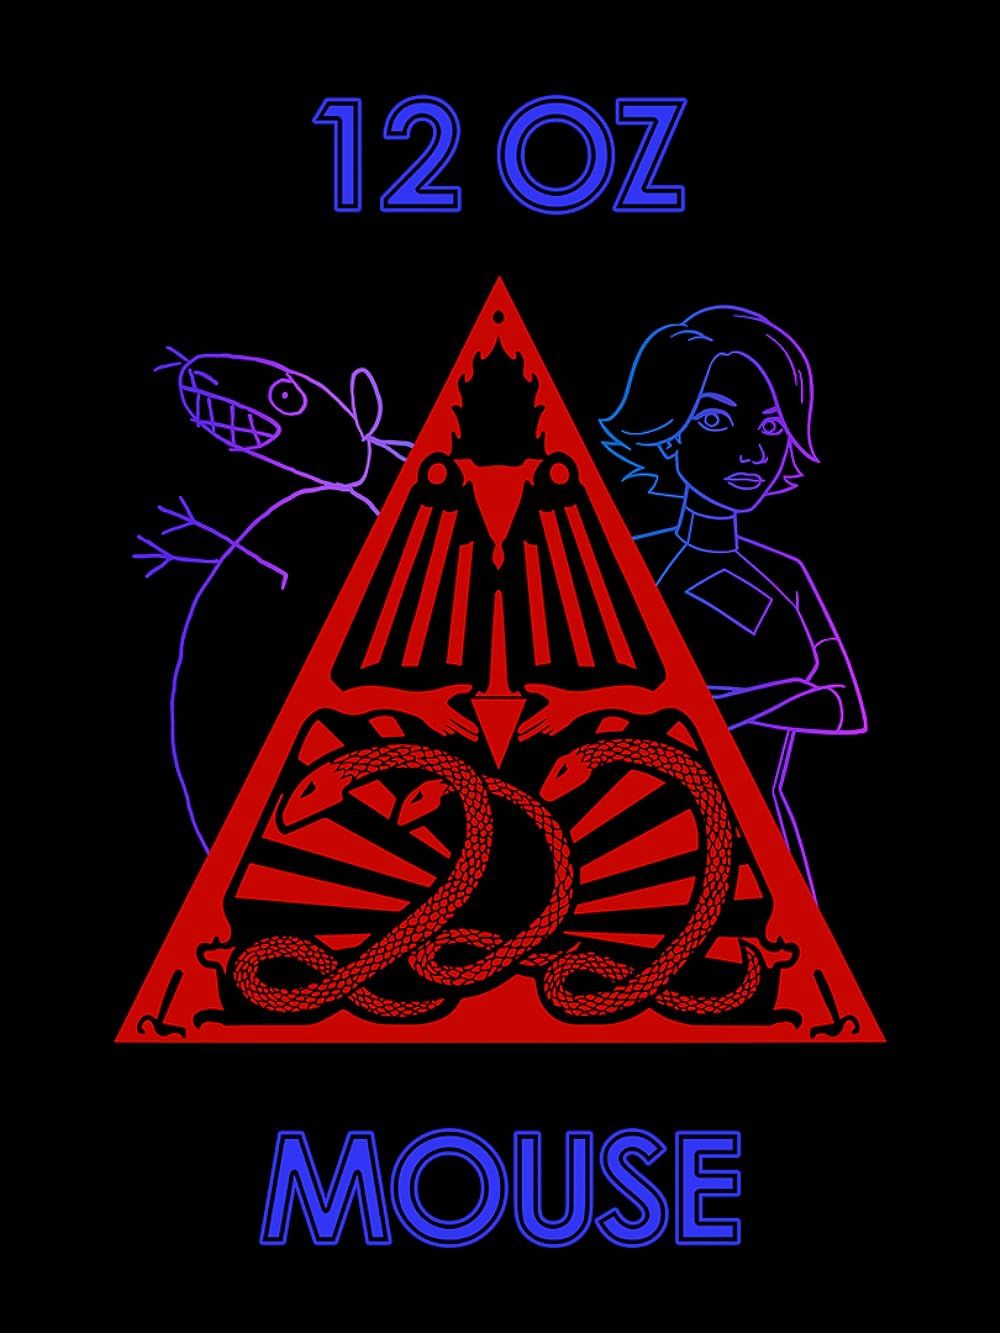 Mouse and a Woman on the 12 oz. Mouse Poster